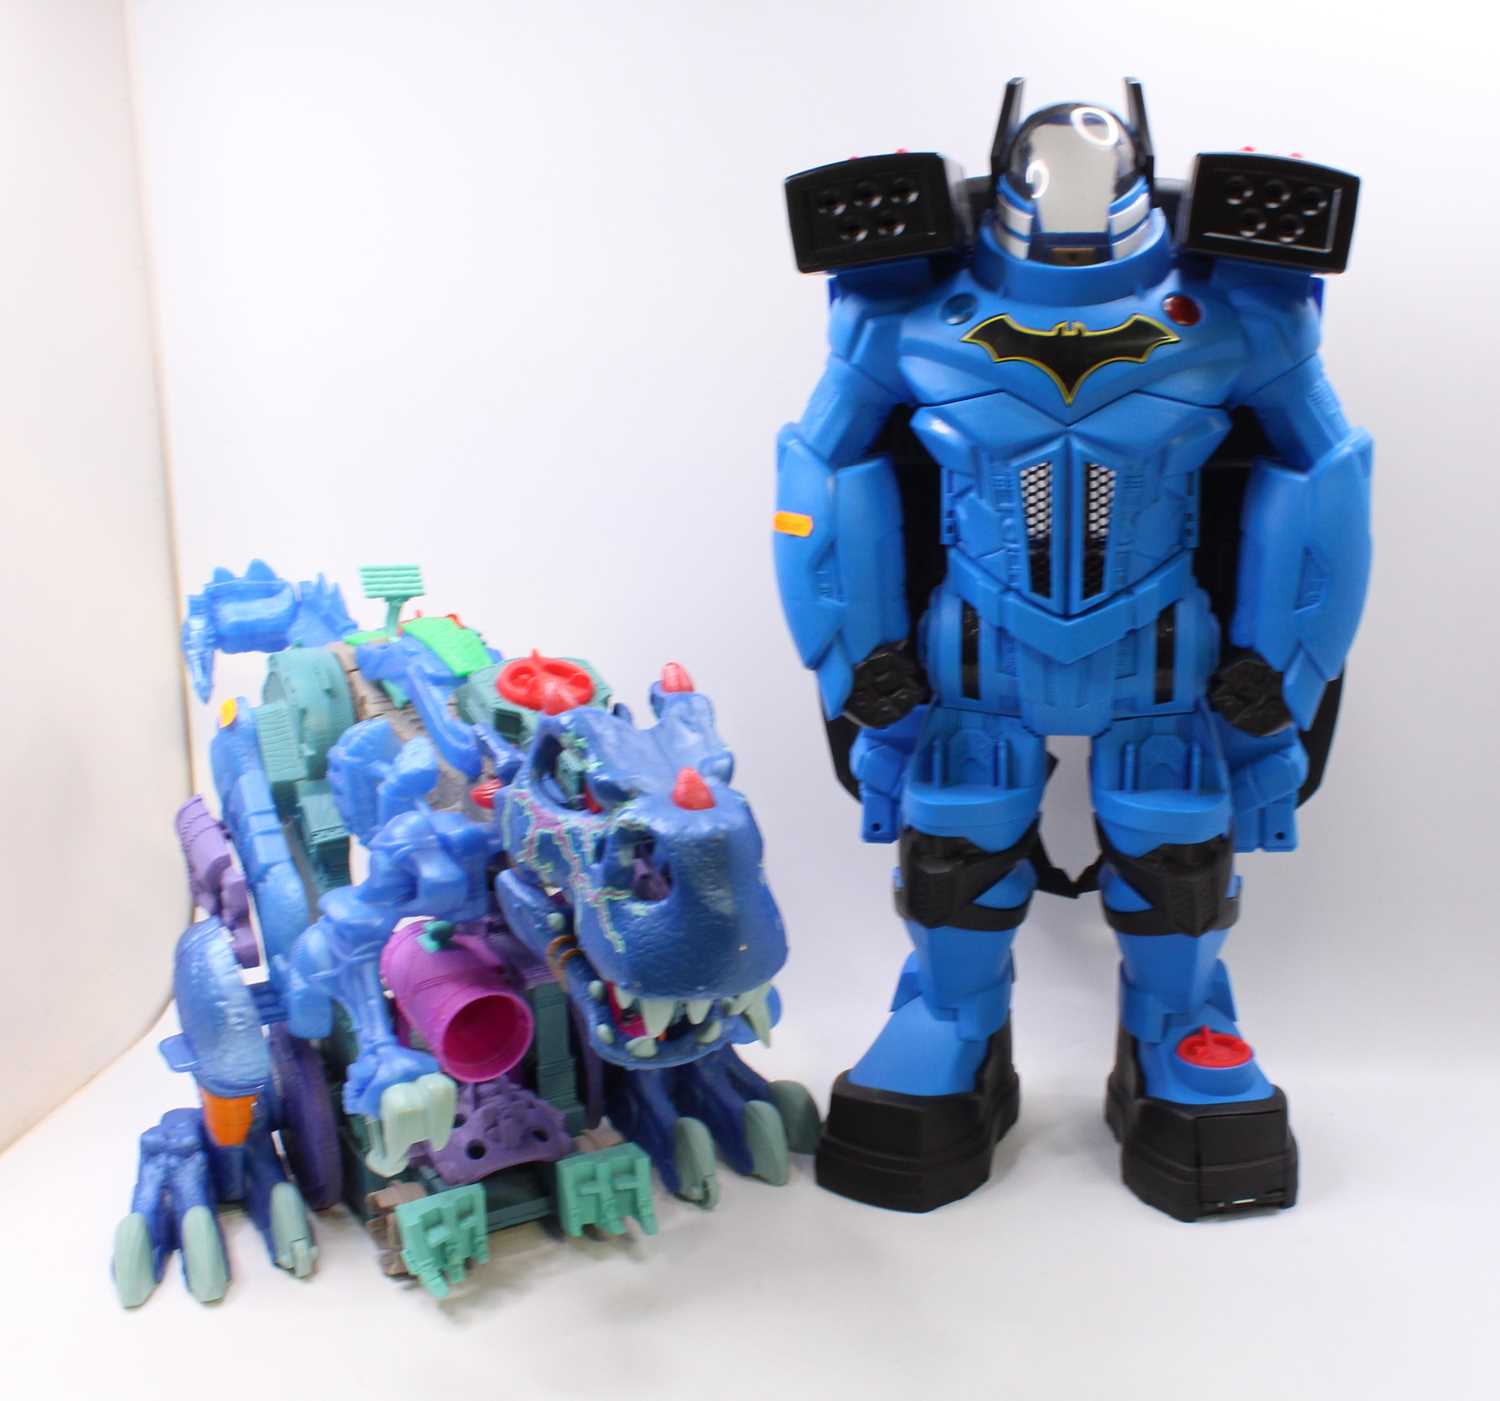 A collection of toys to inlcude plastic vinyl dinosaurs, Laser X, laser tag gift sets, a Robo